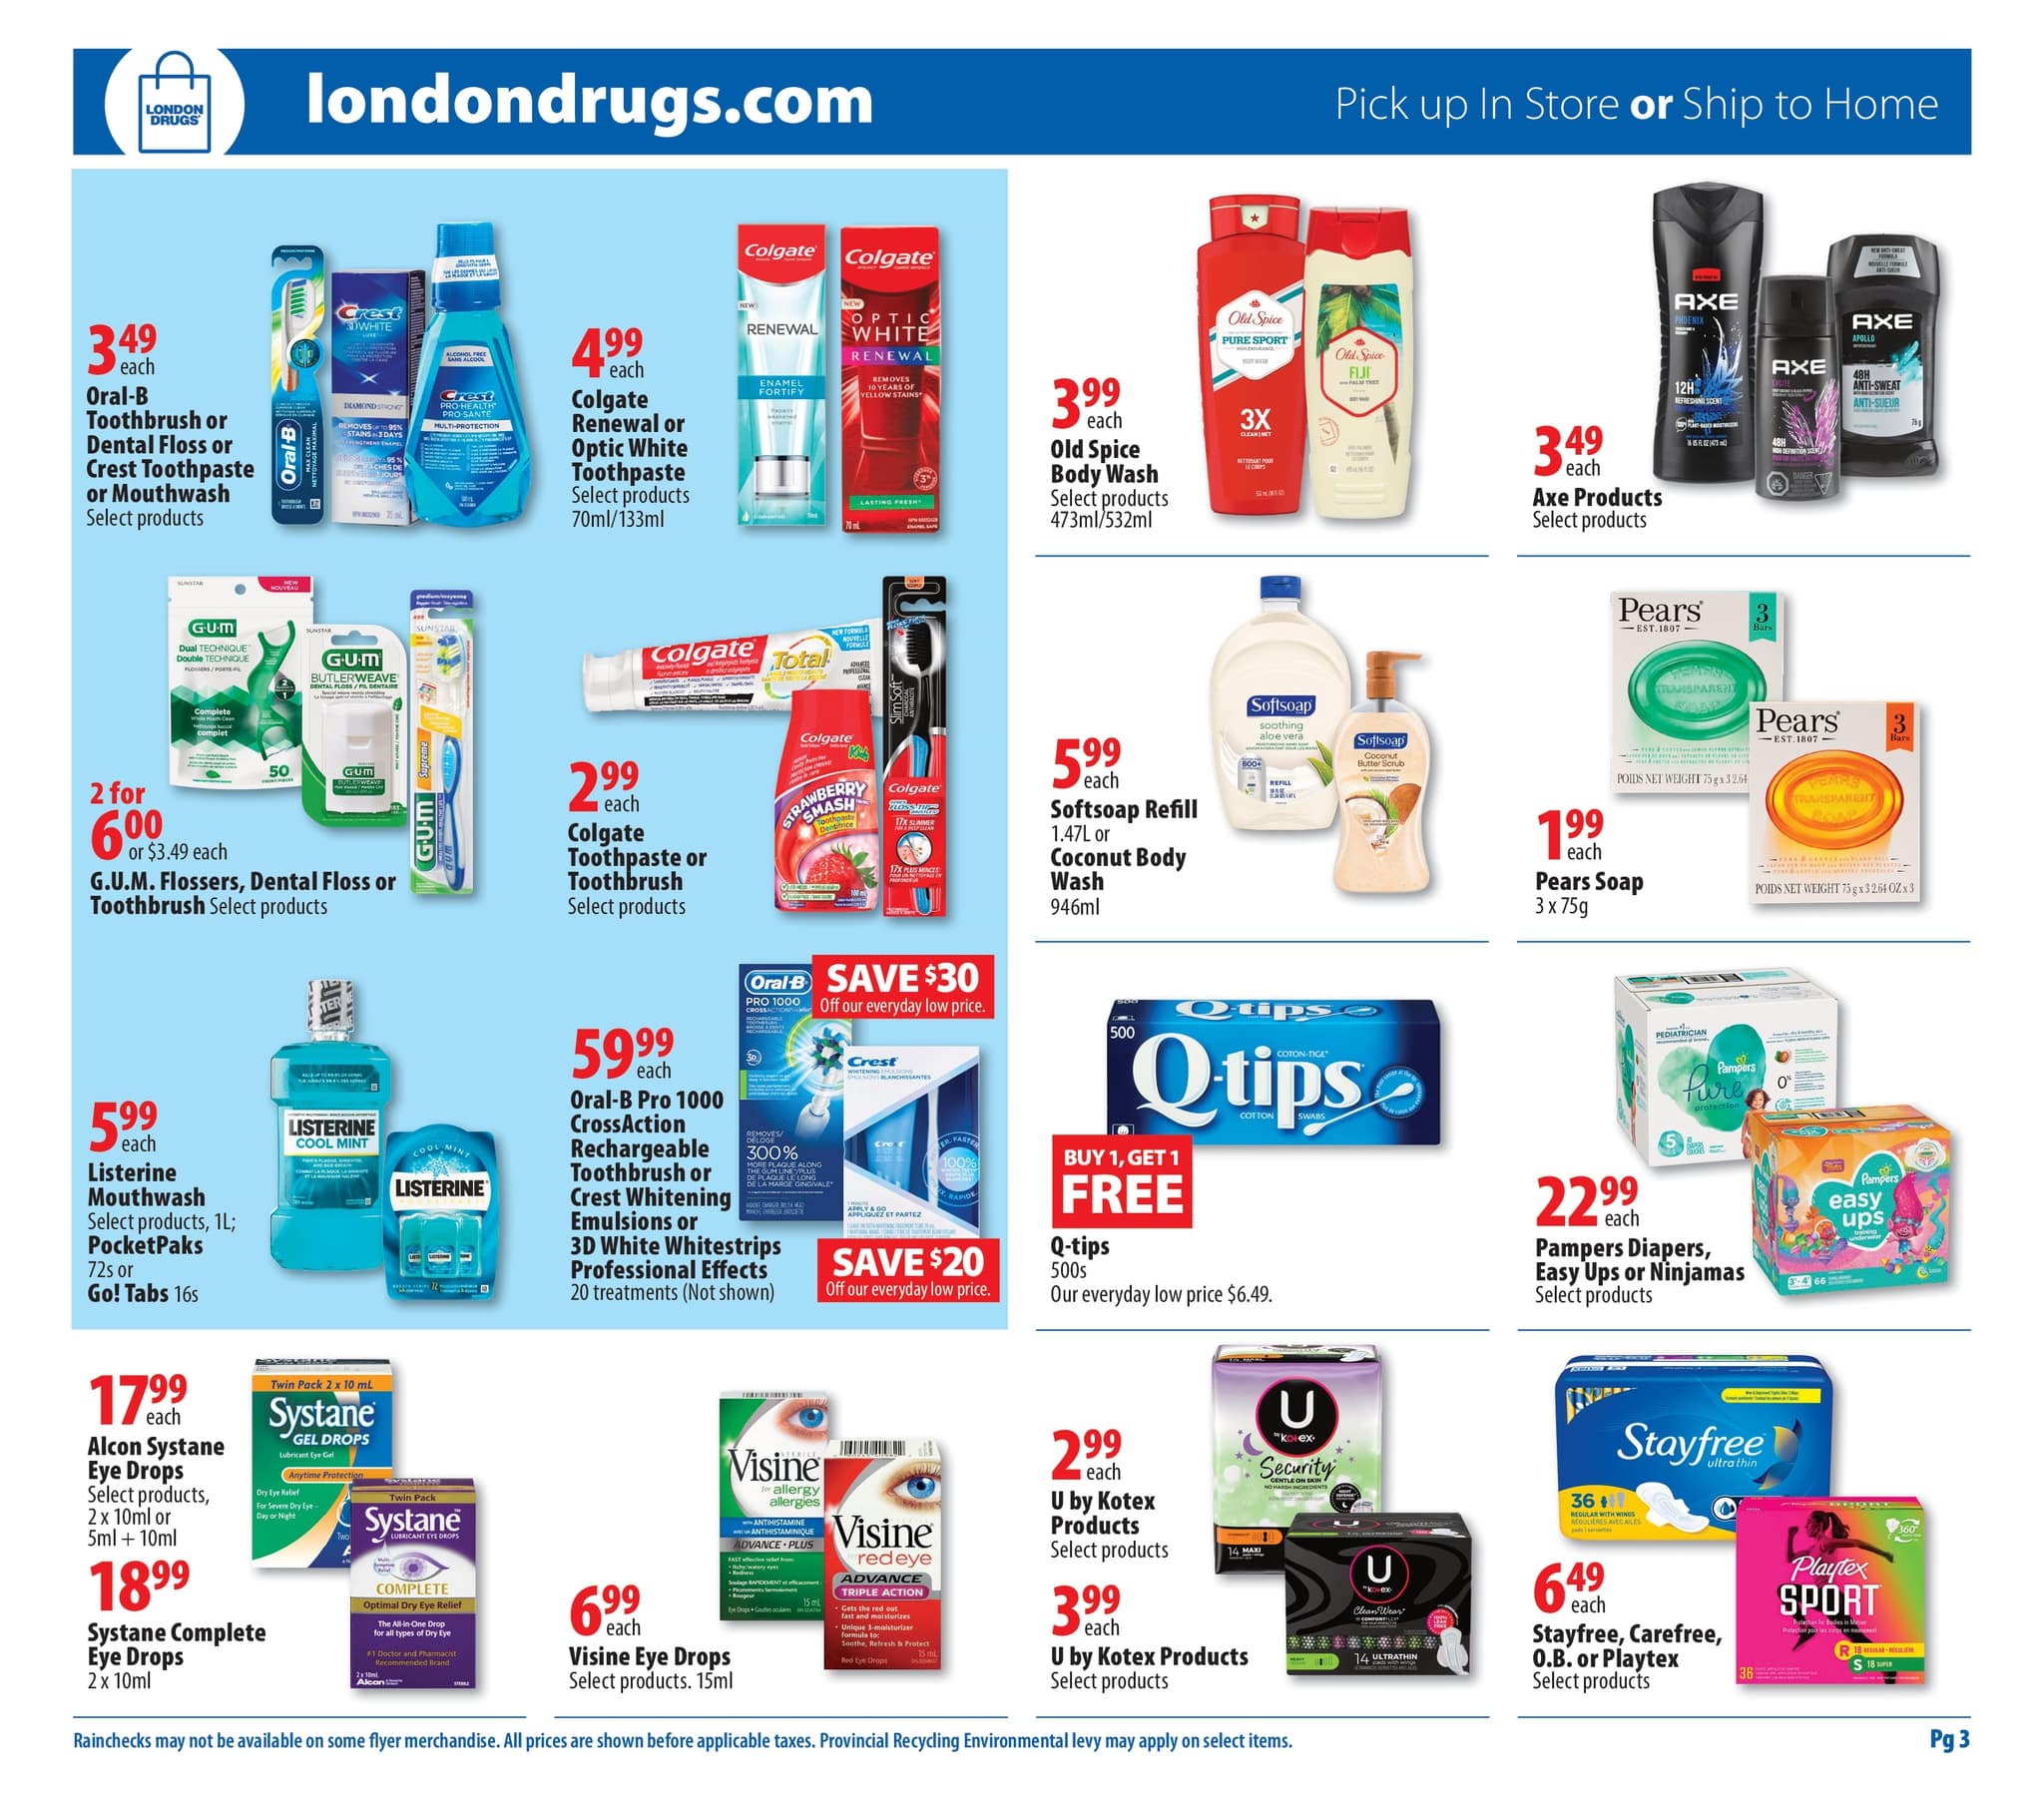 London Drugs - Weekly Flyer Specials - Page 3